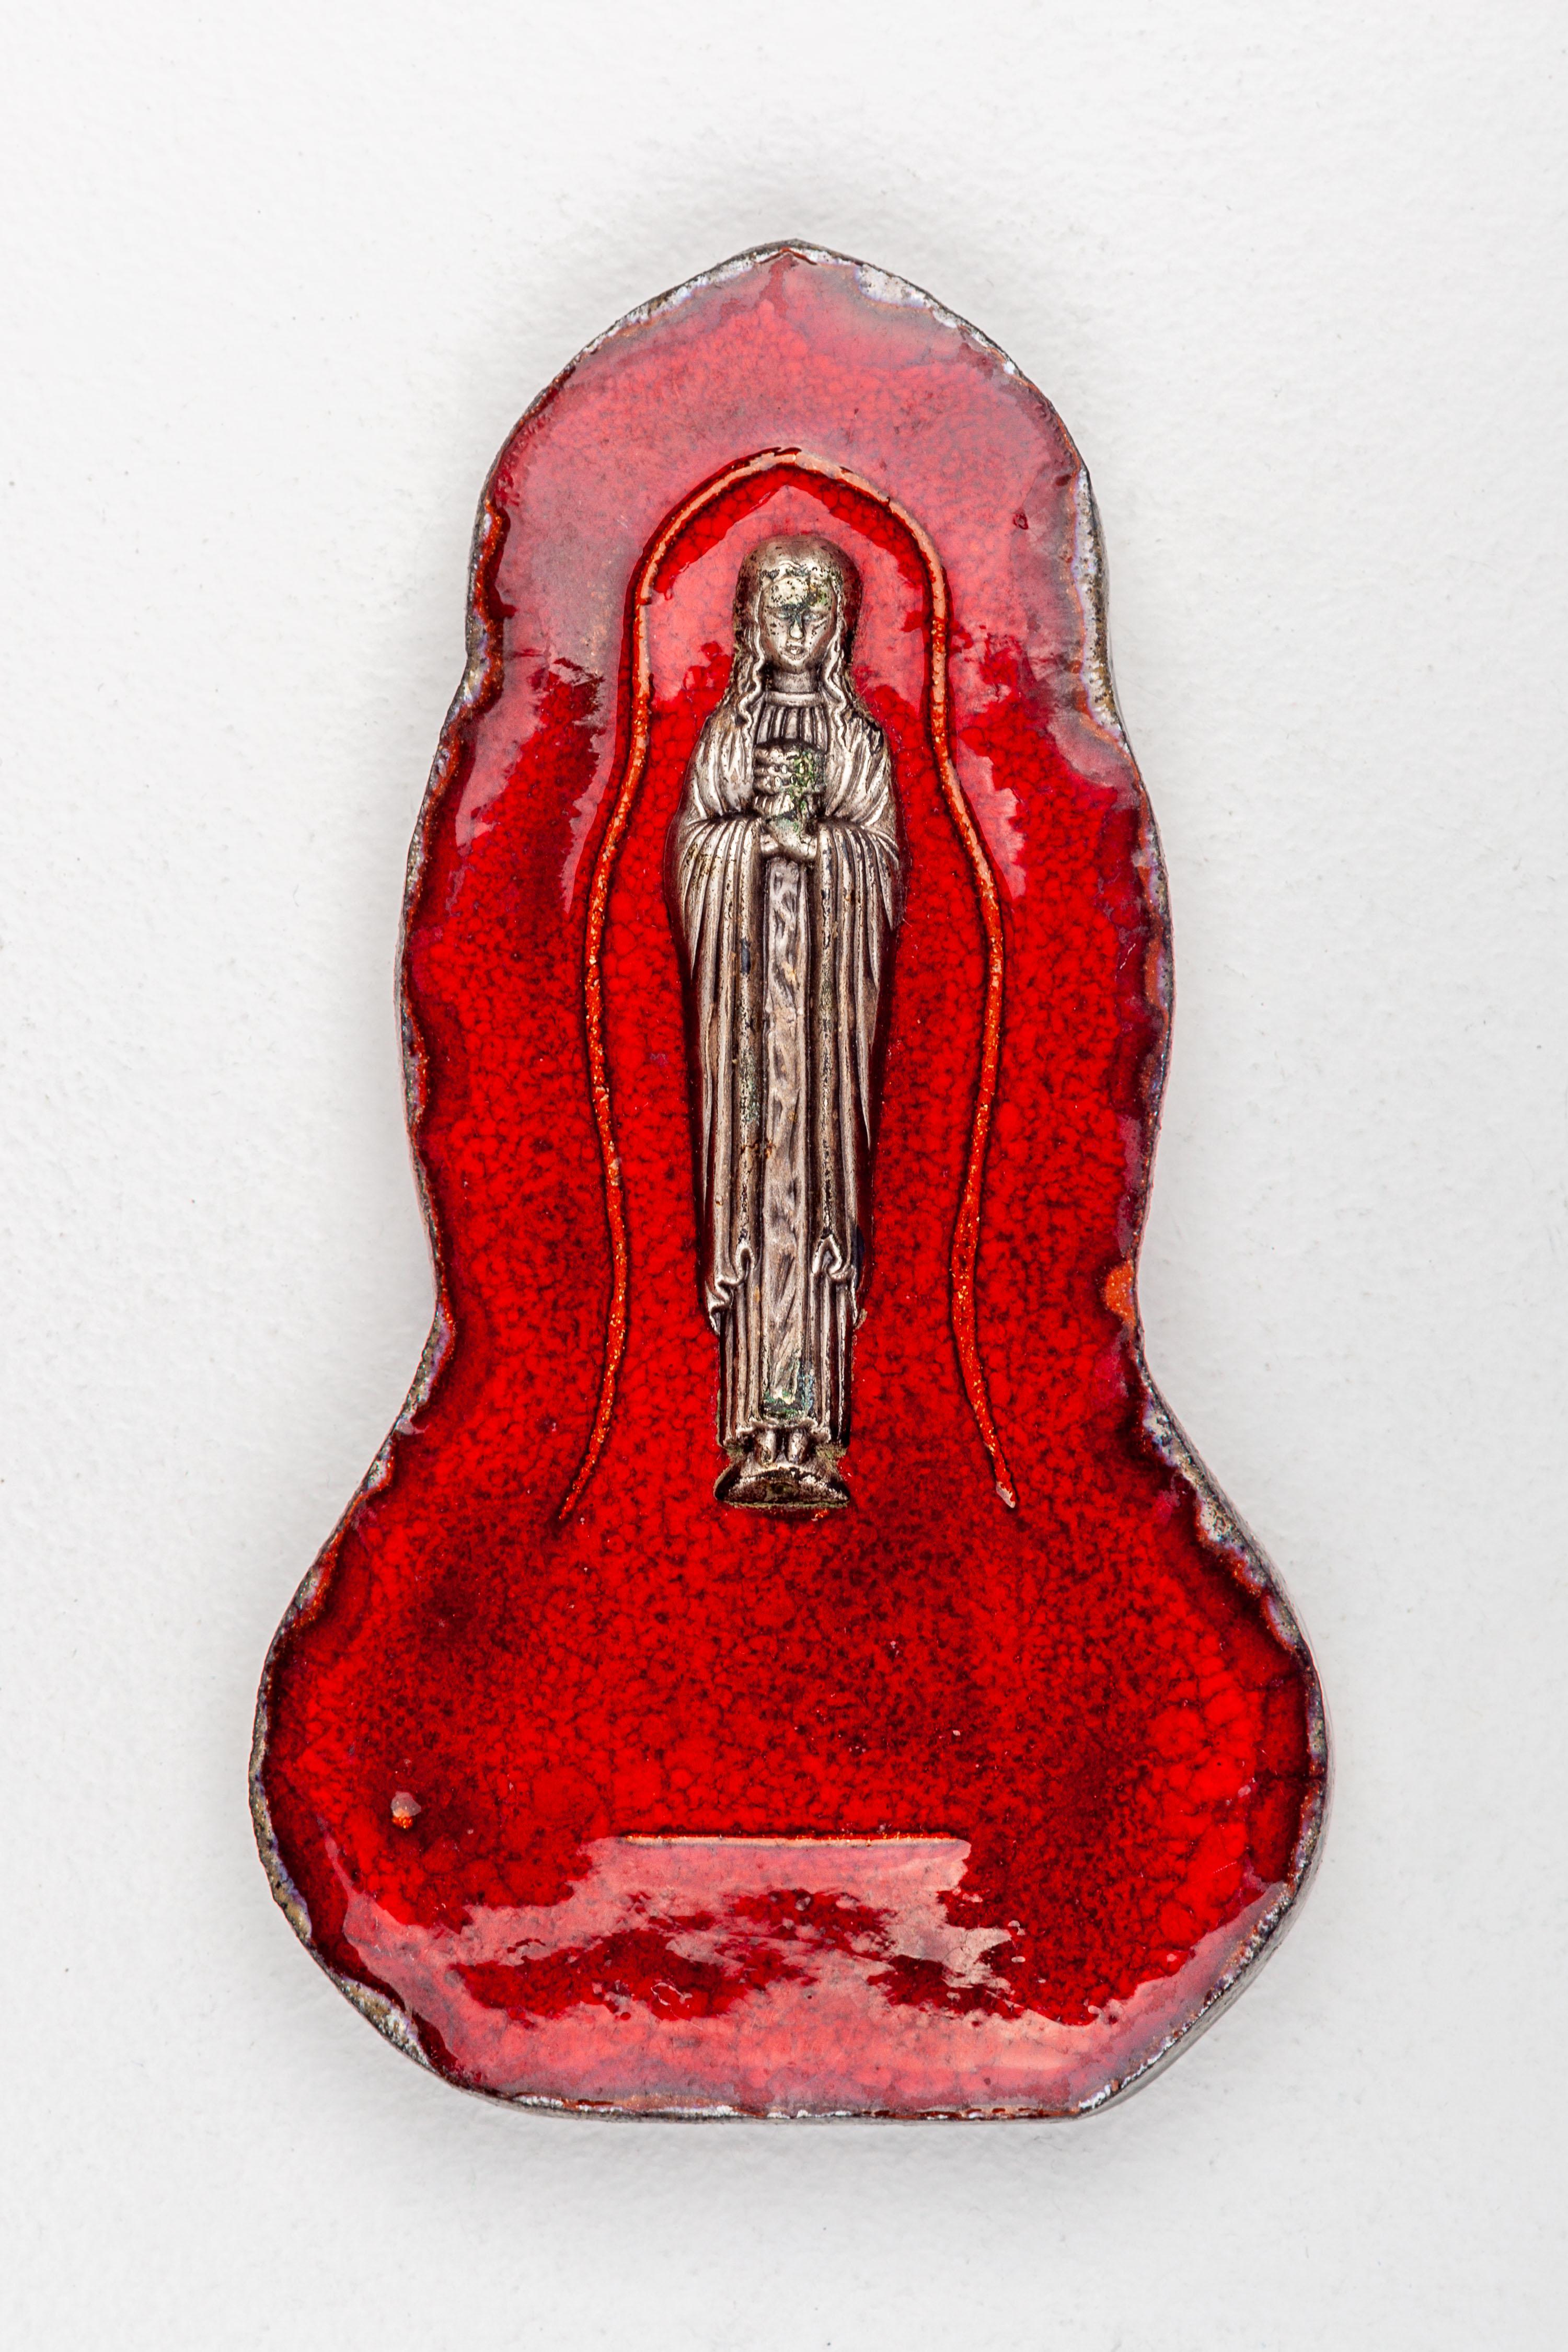 This captivating ceramic wall sculpture of the Virgin Mary epitomizes the ingenuity of mid-century European studio pottery. Handcrafted by an anonymous artist, this devotional artwork is steeped in the traditional Marian iconography yet is